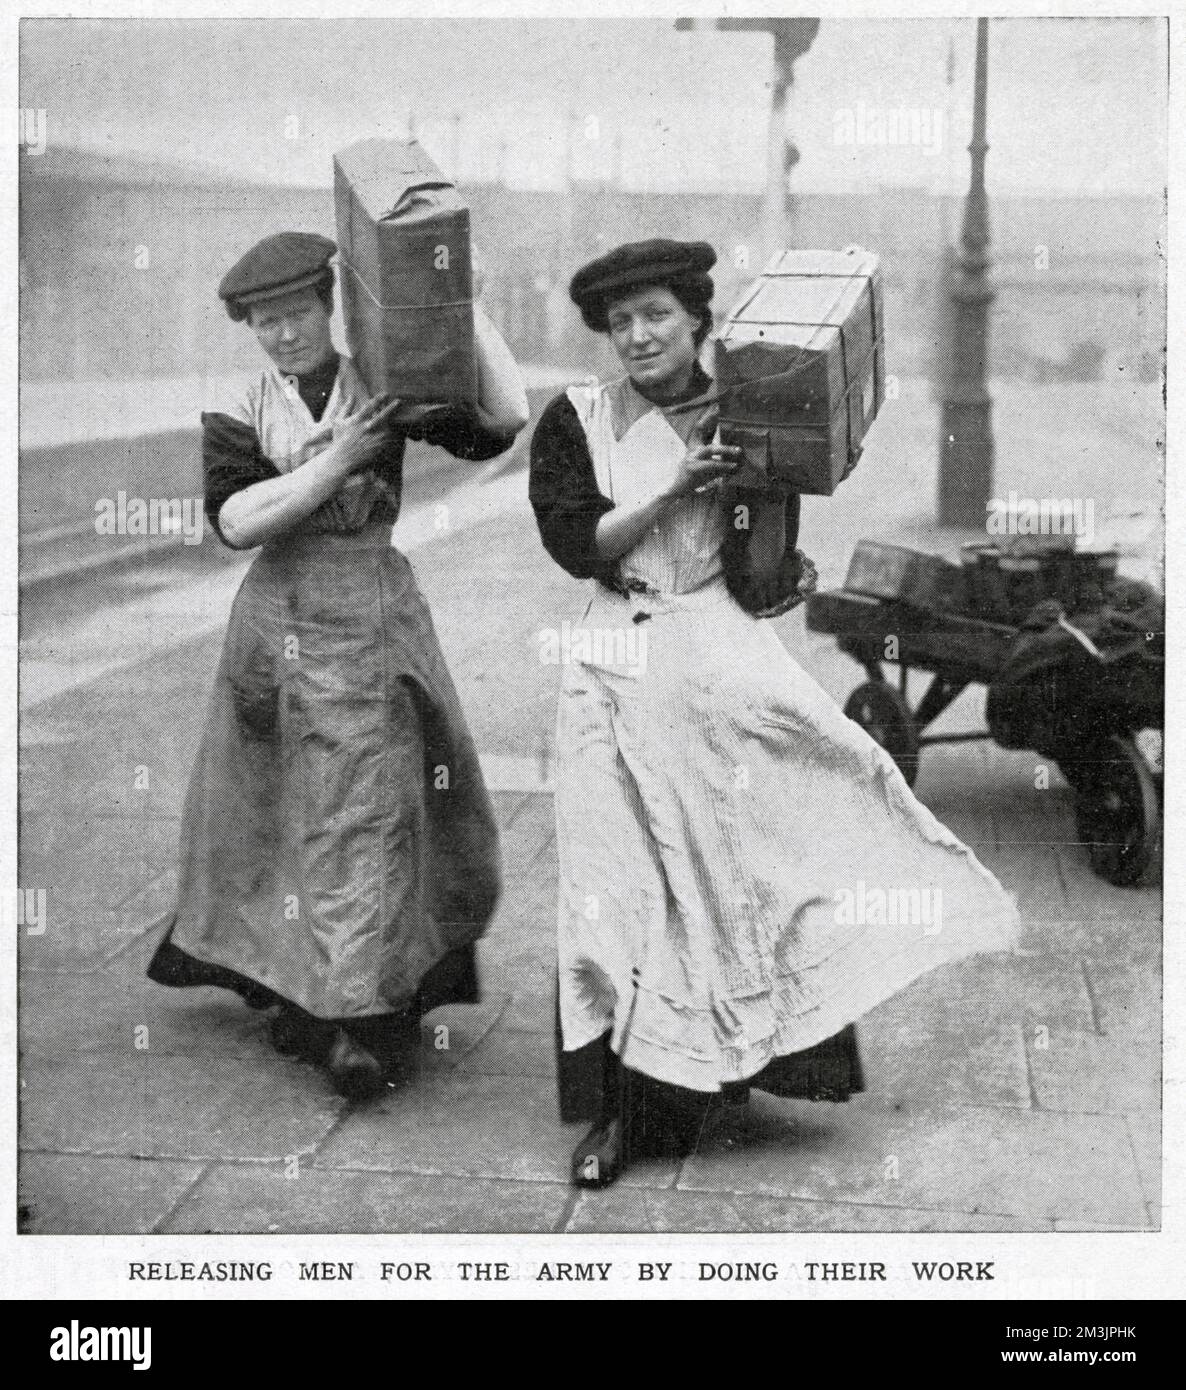 Two women railway porters in 1915. As World War I progressed, women began to work in traditionally male jobs as part of the war effort. This development was instrumental in women gaining the vote shortly after the end of the war.     Date: 1915 Stock Photo